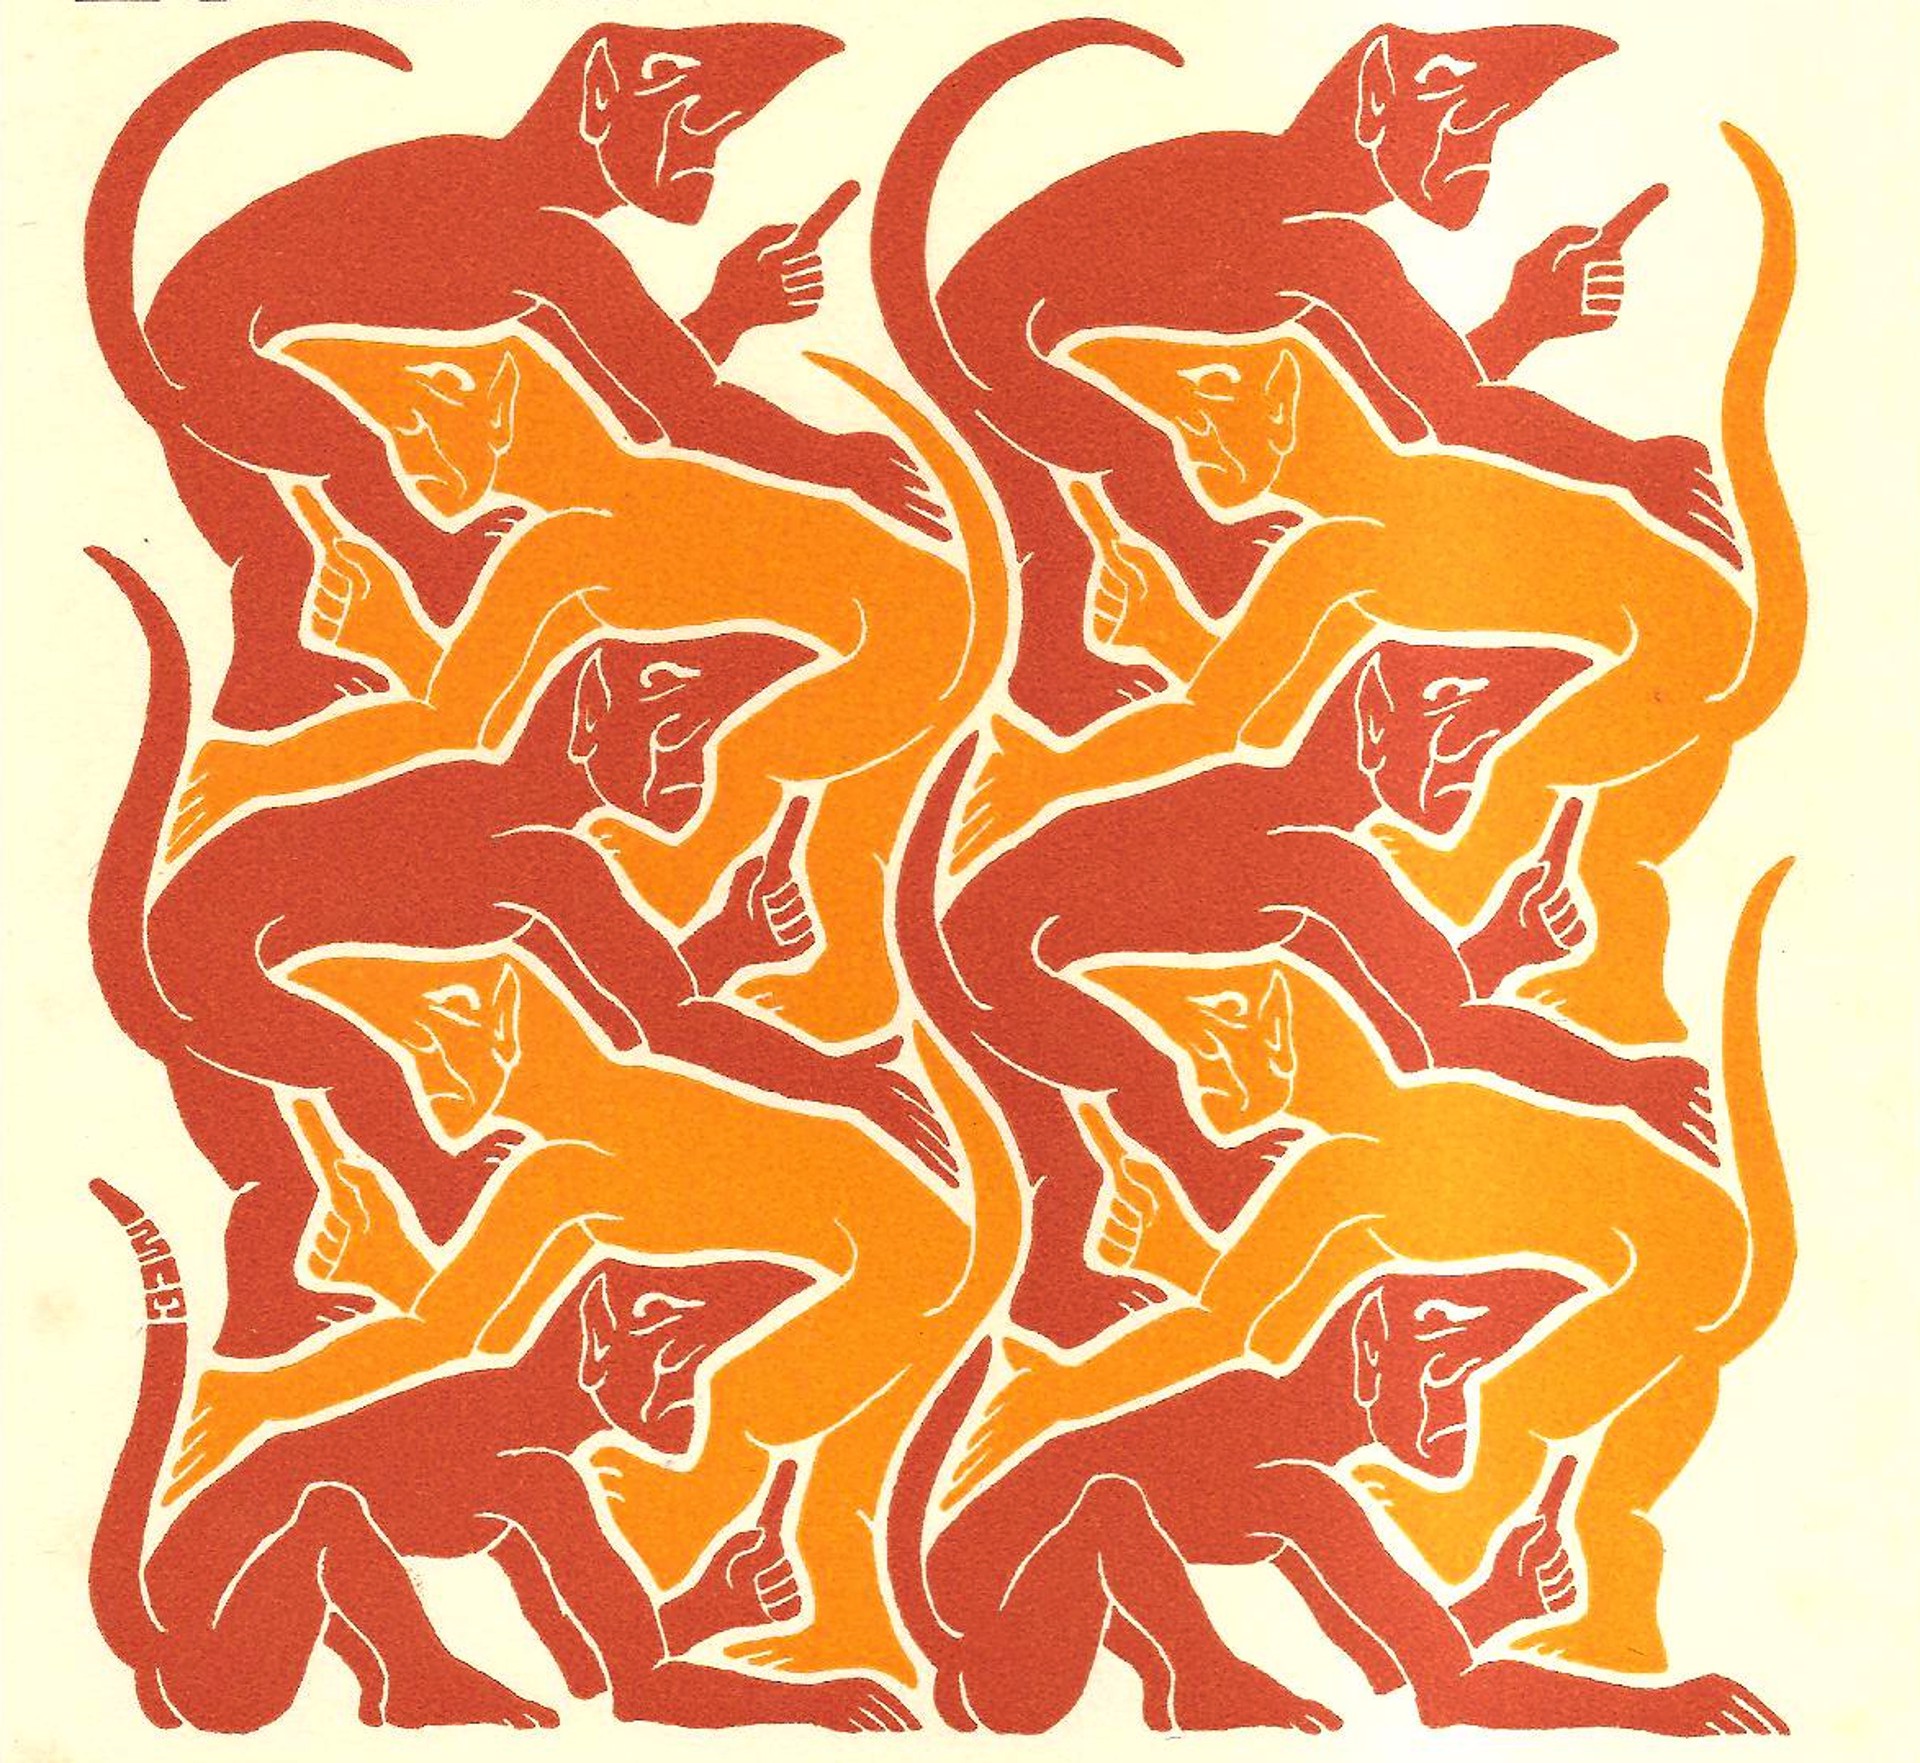 Fire - Devils, Strens New Year's Greeting Card by M.C. Escher